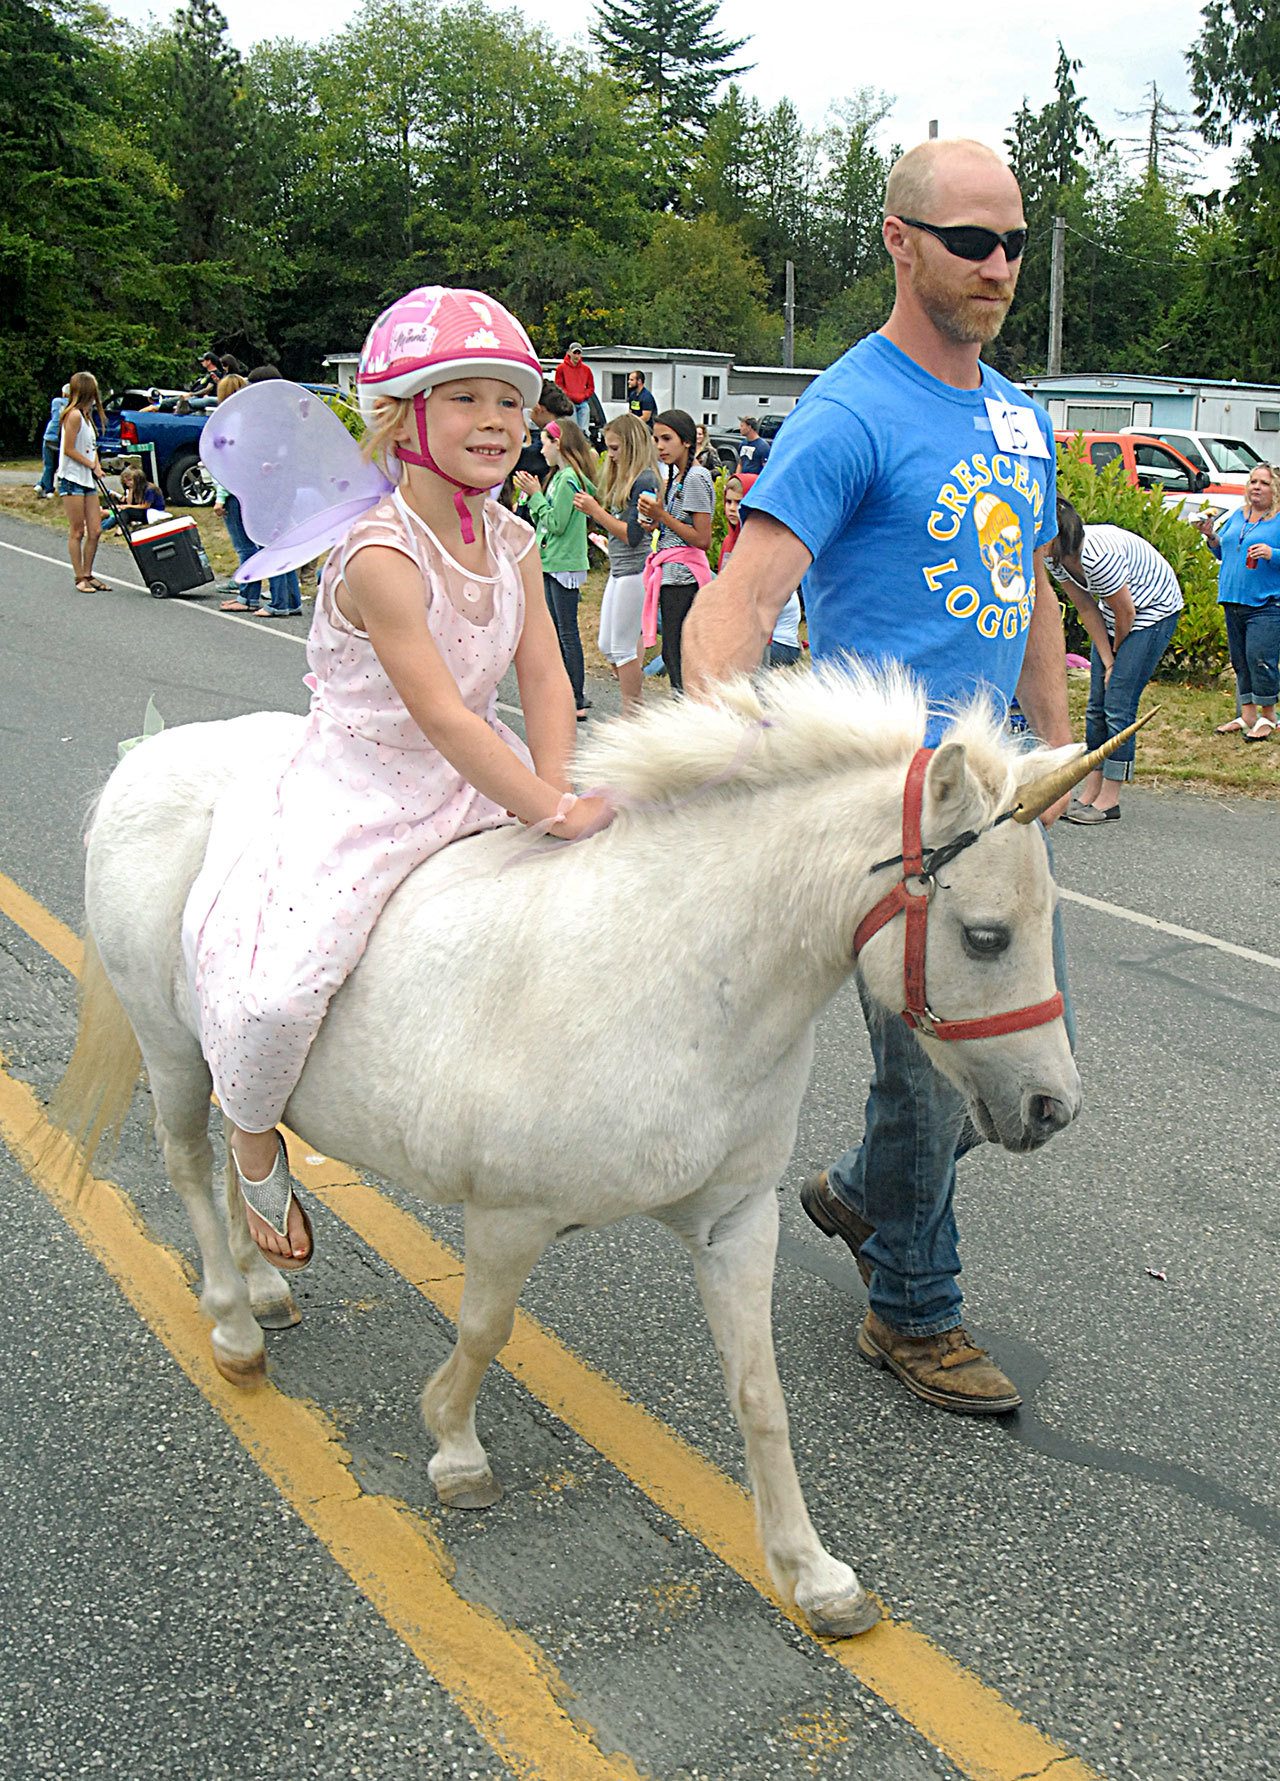 Darica Bertelson, 6, of Joyce rides her unicorn-costumed horse, Precious Pickles, led by her father, Darrin Bartelson, as they take part in the Joyce Daze grand parade. (Keith Thorpe/Peninsula Daily News)